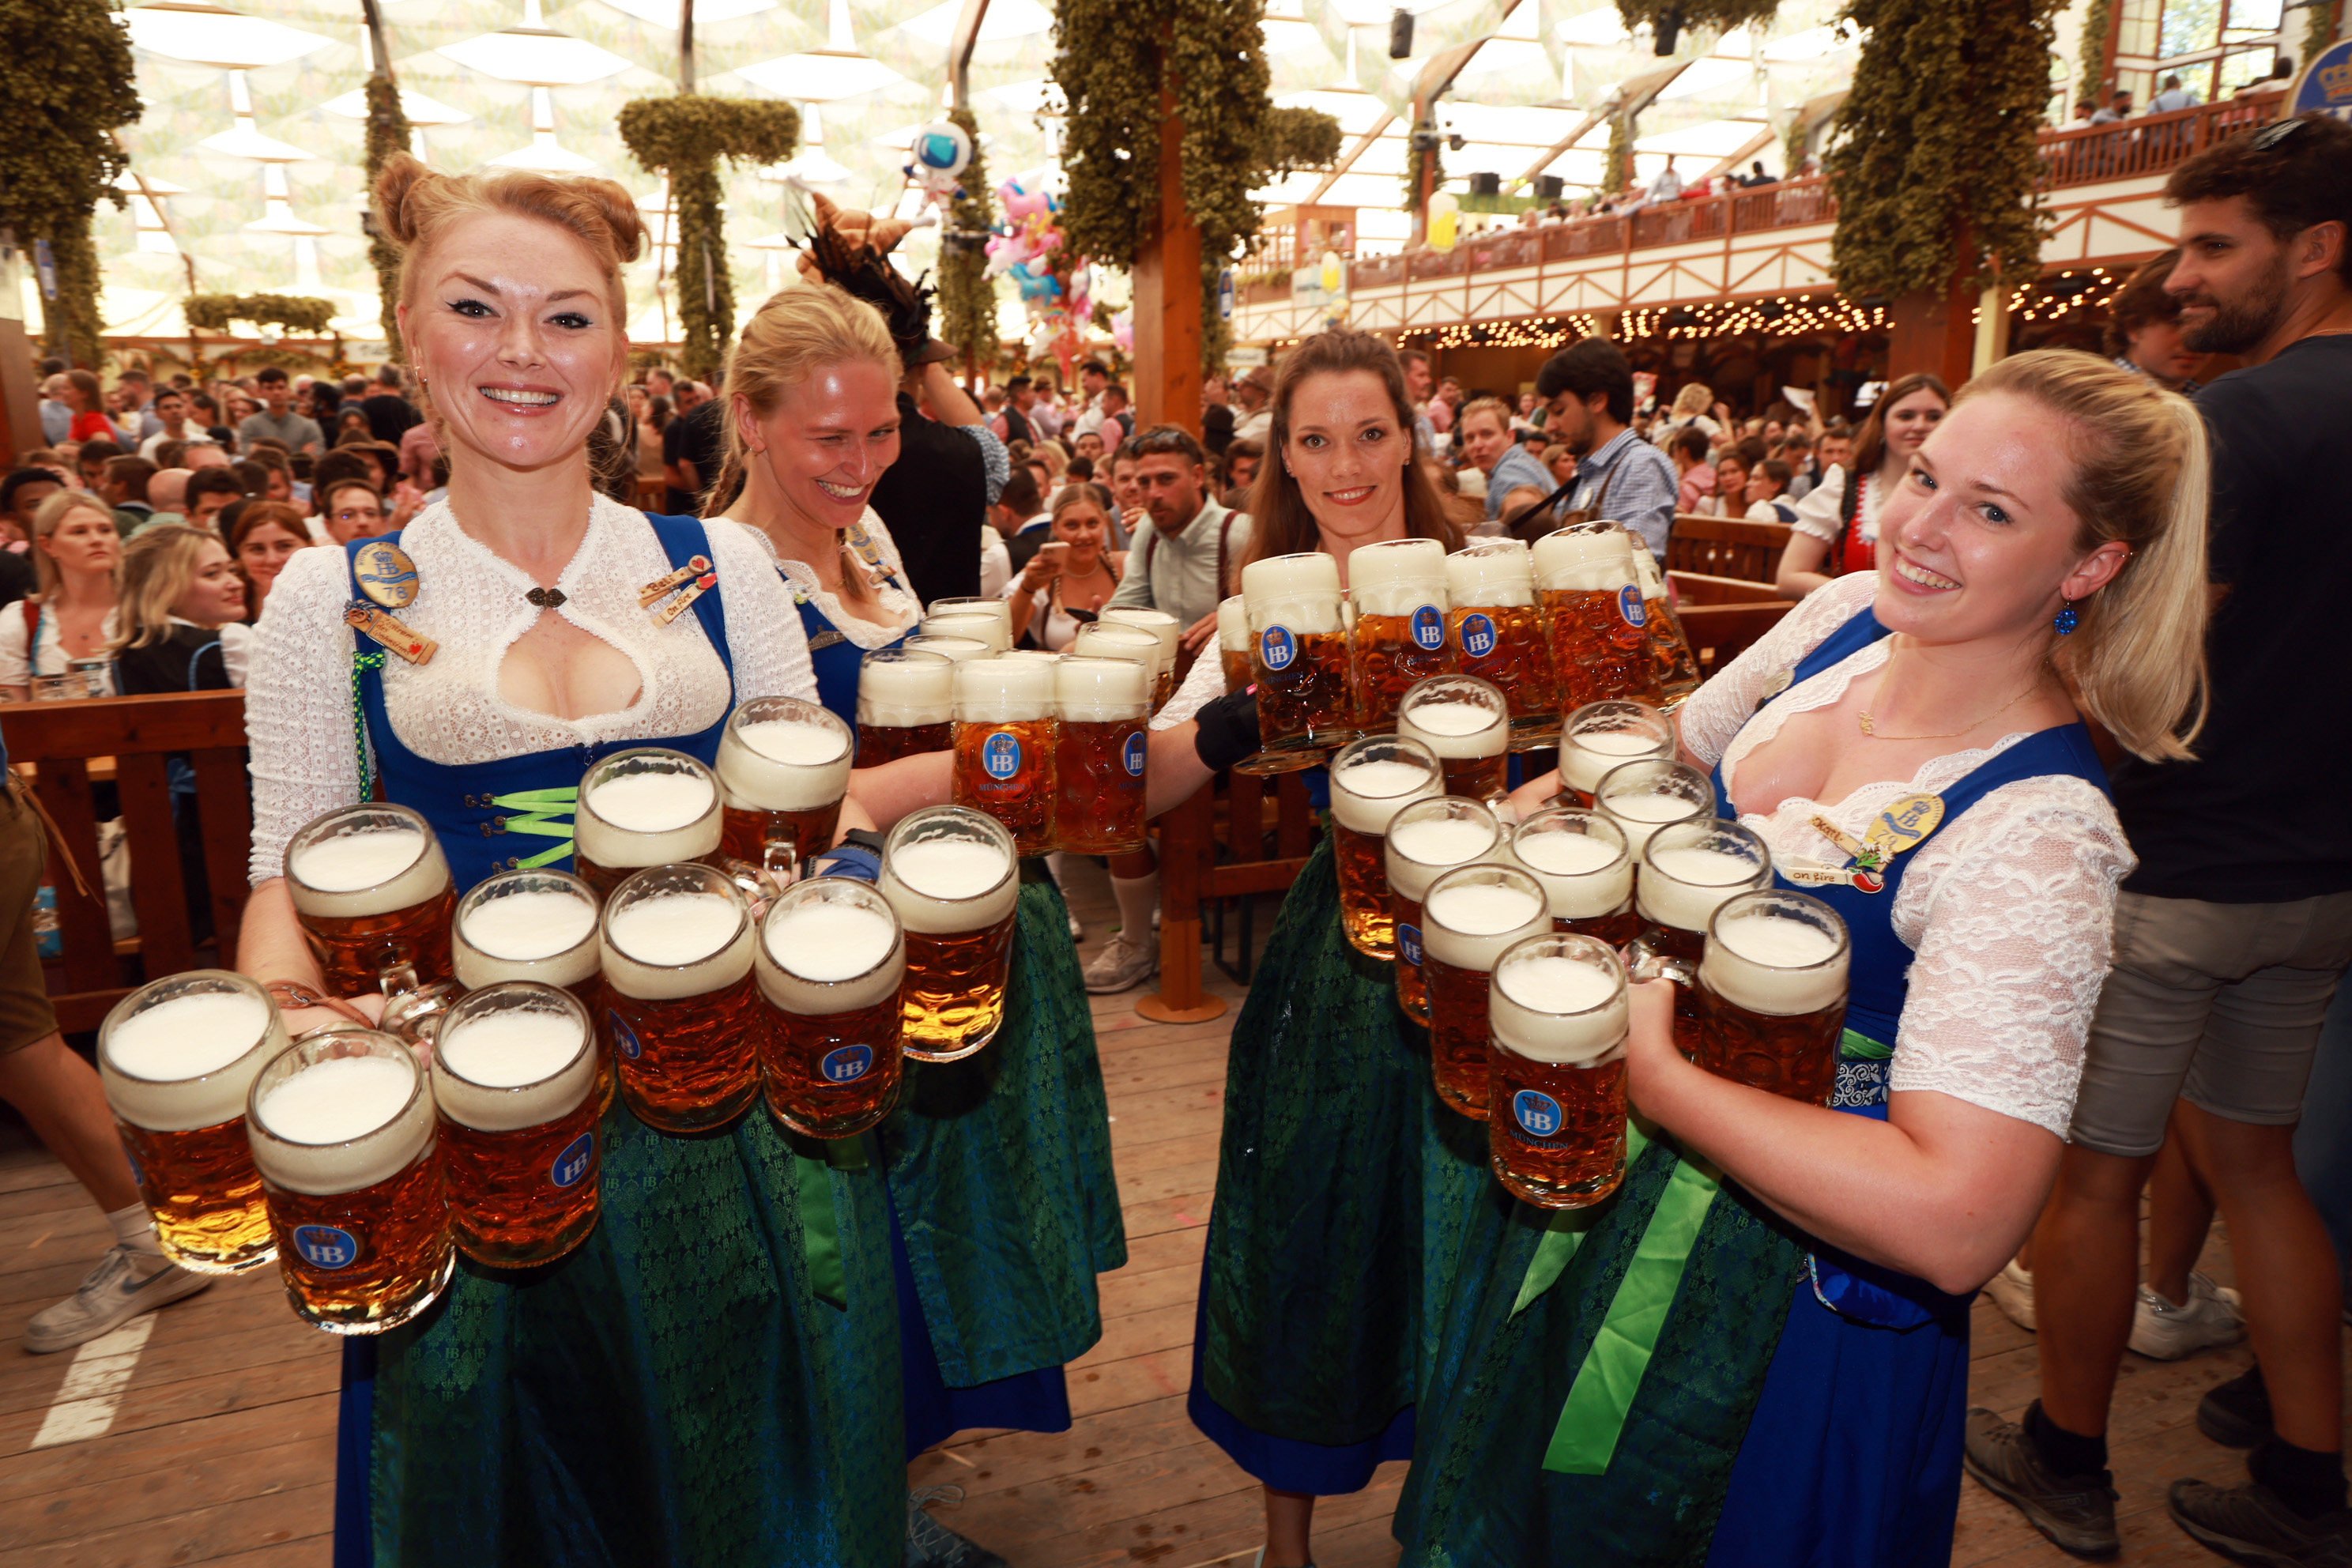 Waitresses of the Hofbraeu tent pose with 1 litre beer mugs on the opening day of the 2023 Munich Oktoberfest in Germany. Photo: Getty Images